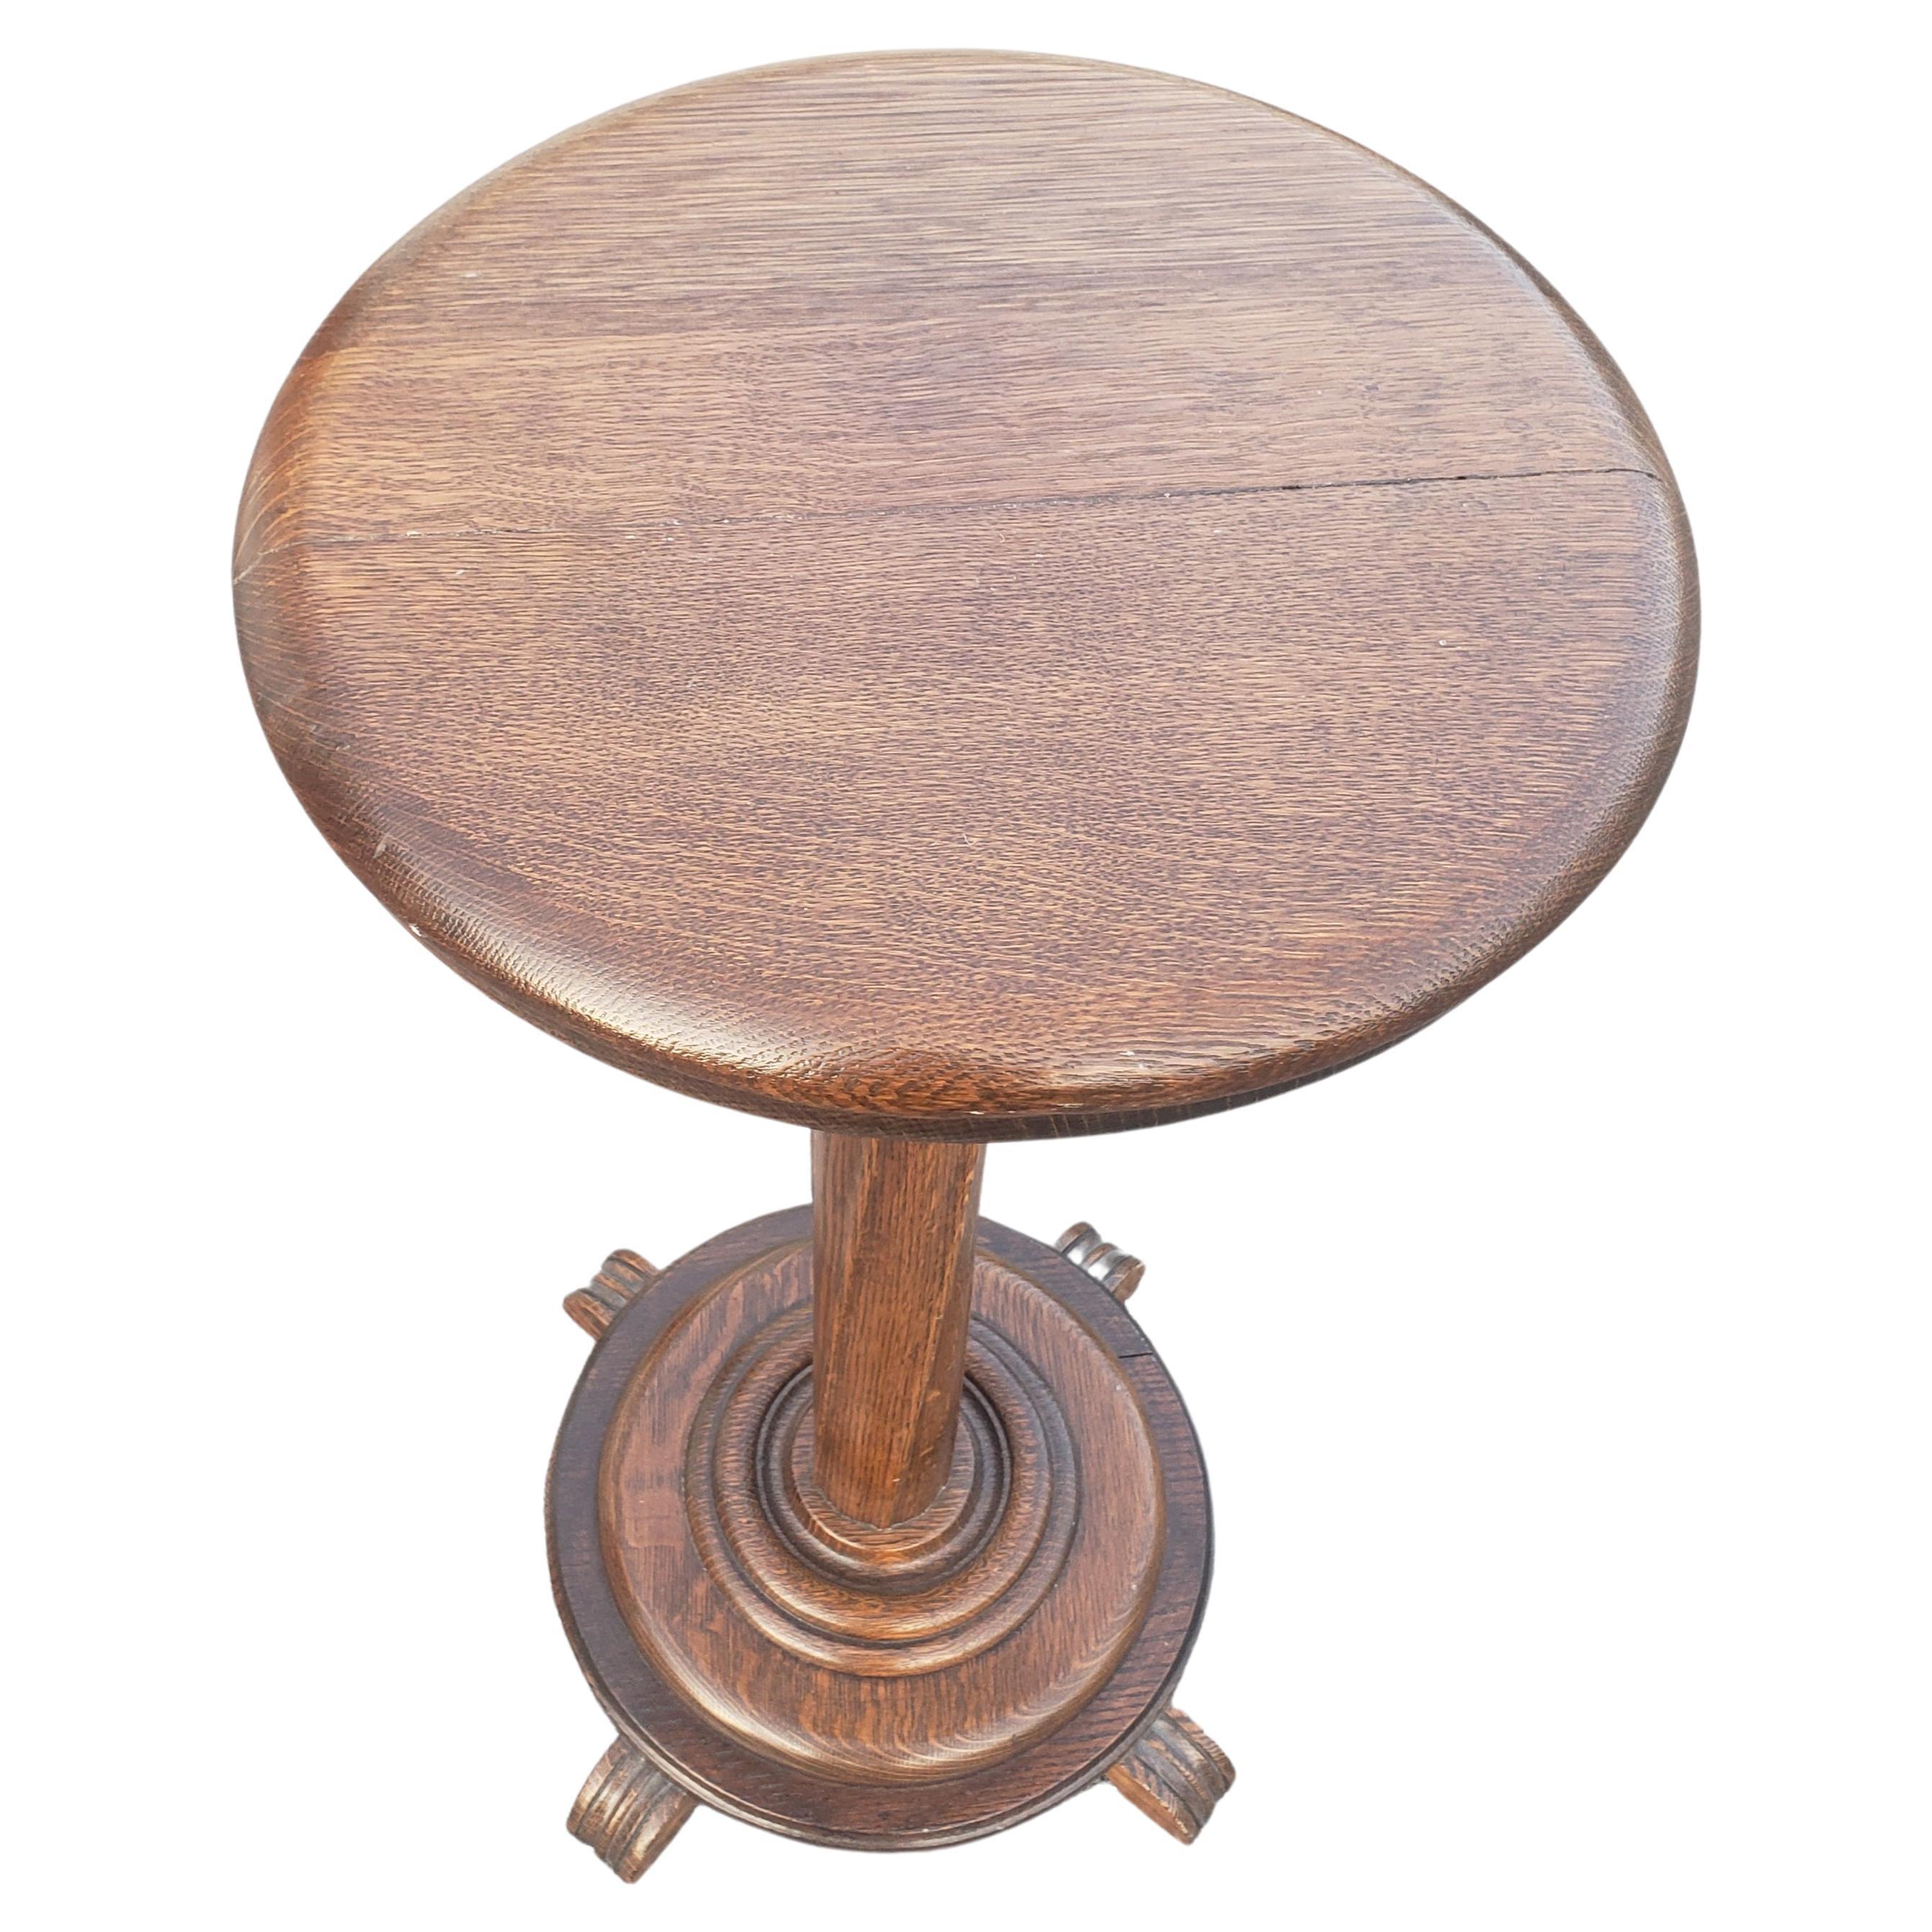 A Mid-Century Edwadian Style Stained Solid Oak Pedestal Plant Stand or candle stand. 
This beautiful stand  is 29.5